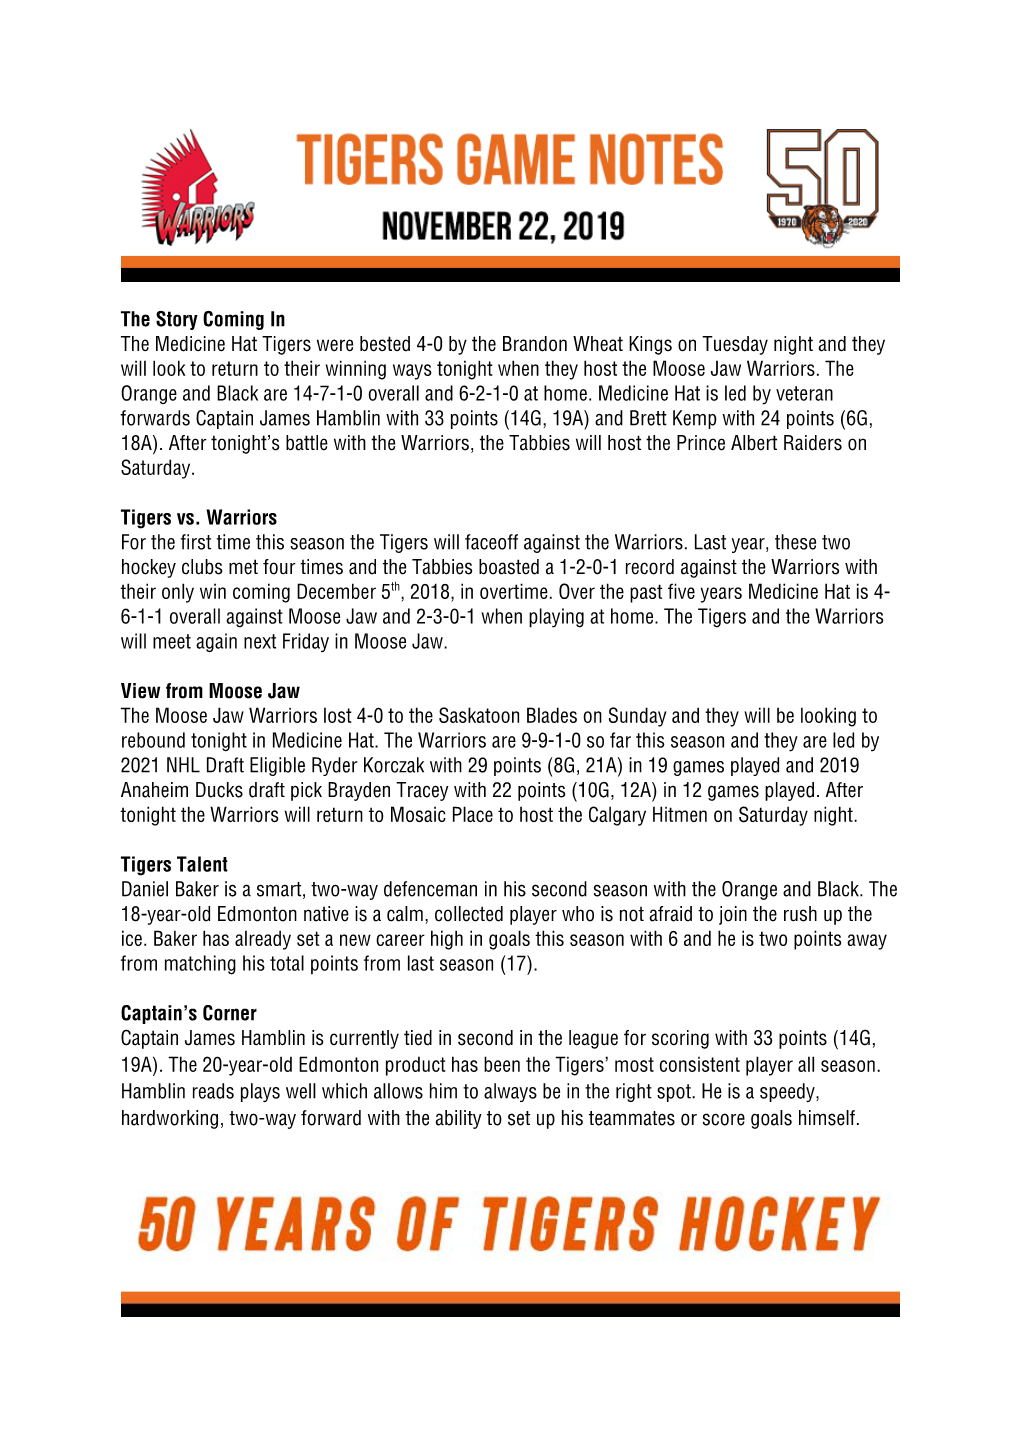 The Story Coming in the Medicine Hat Tigers Were Bested 4-0 by The